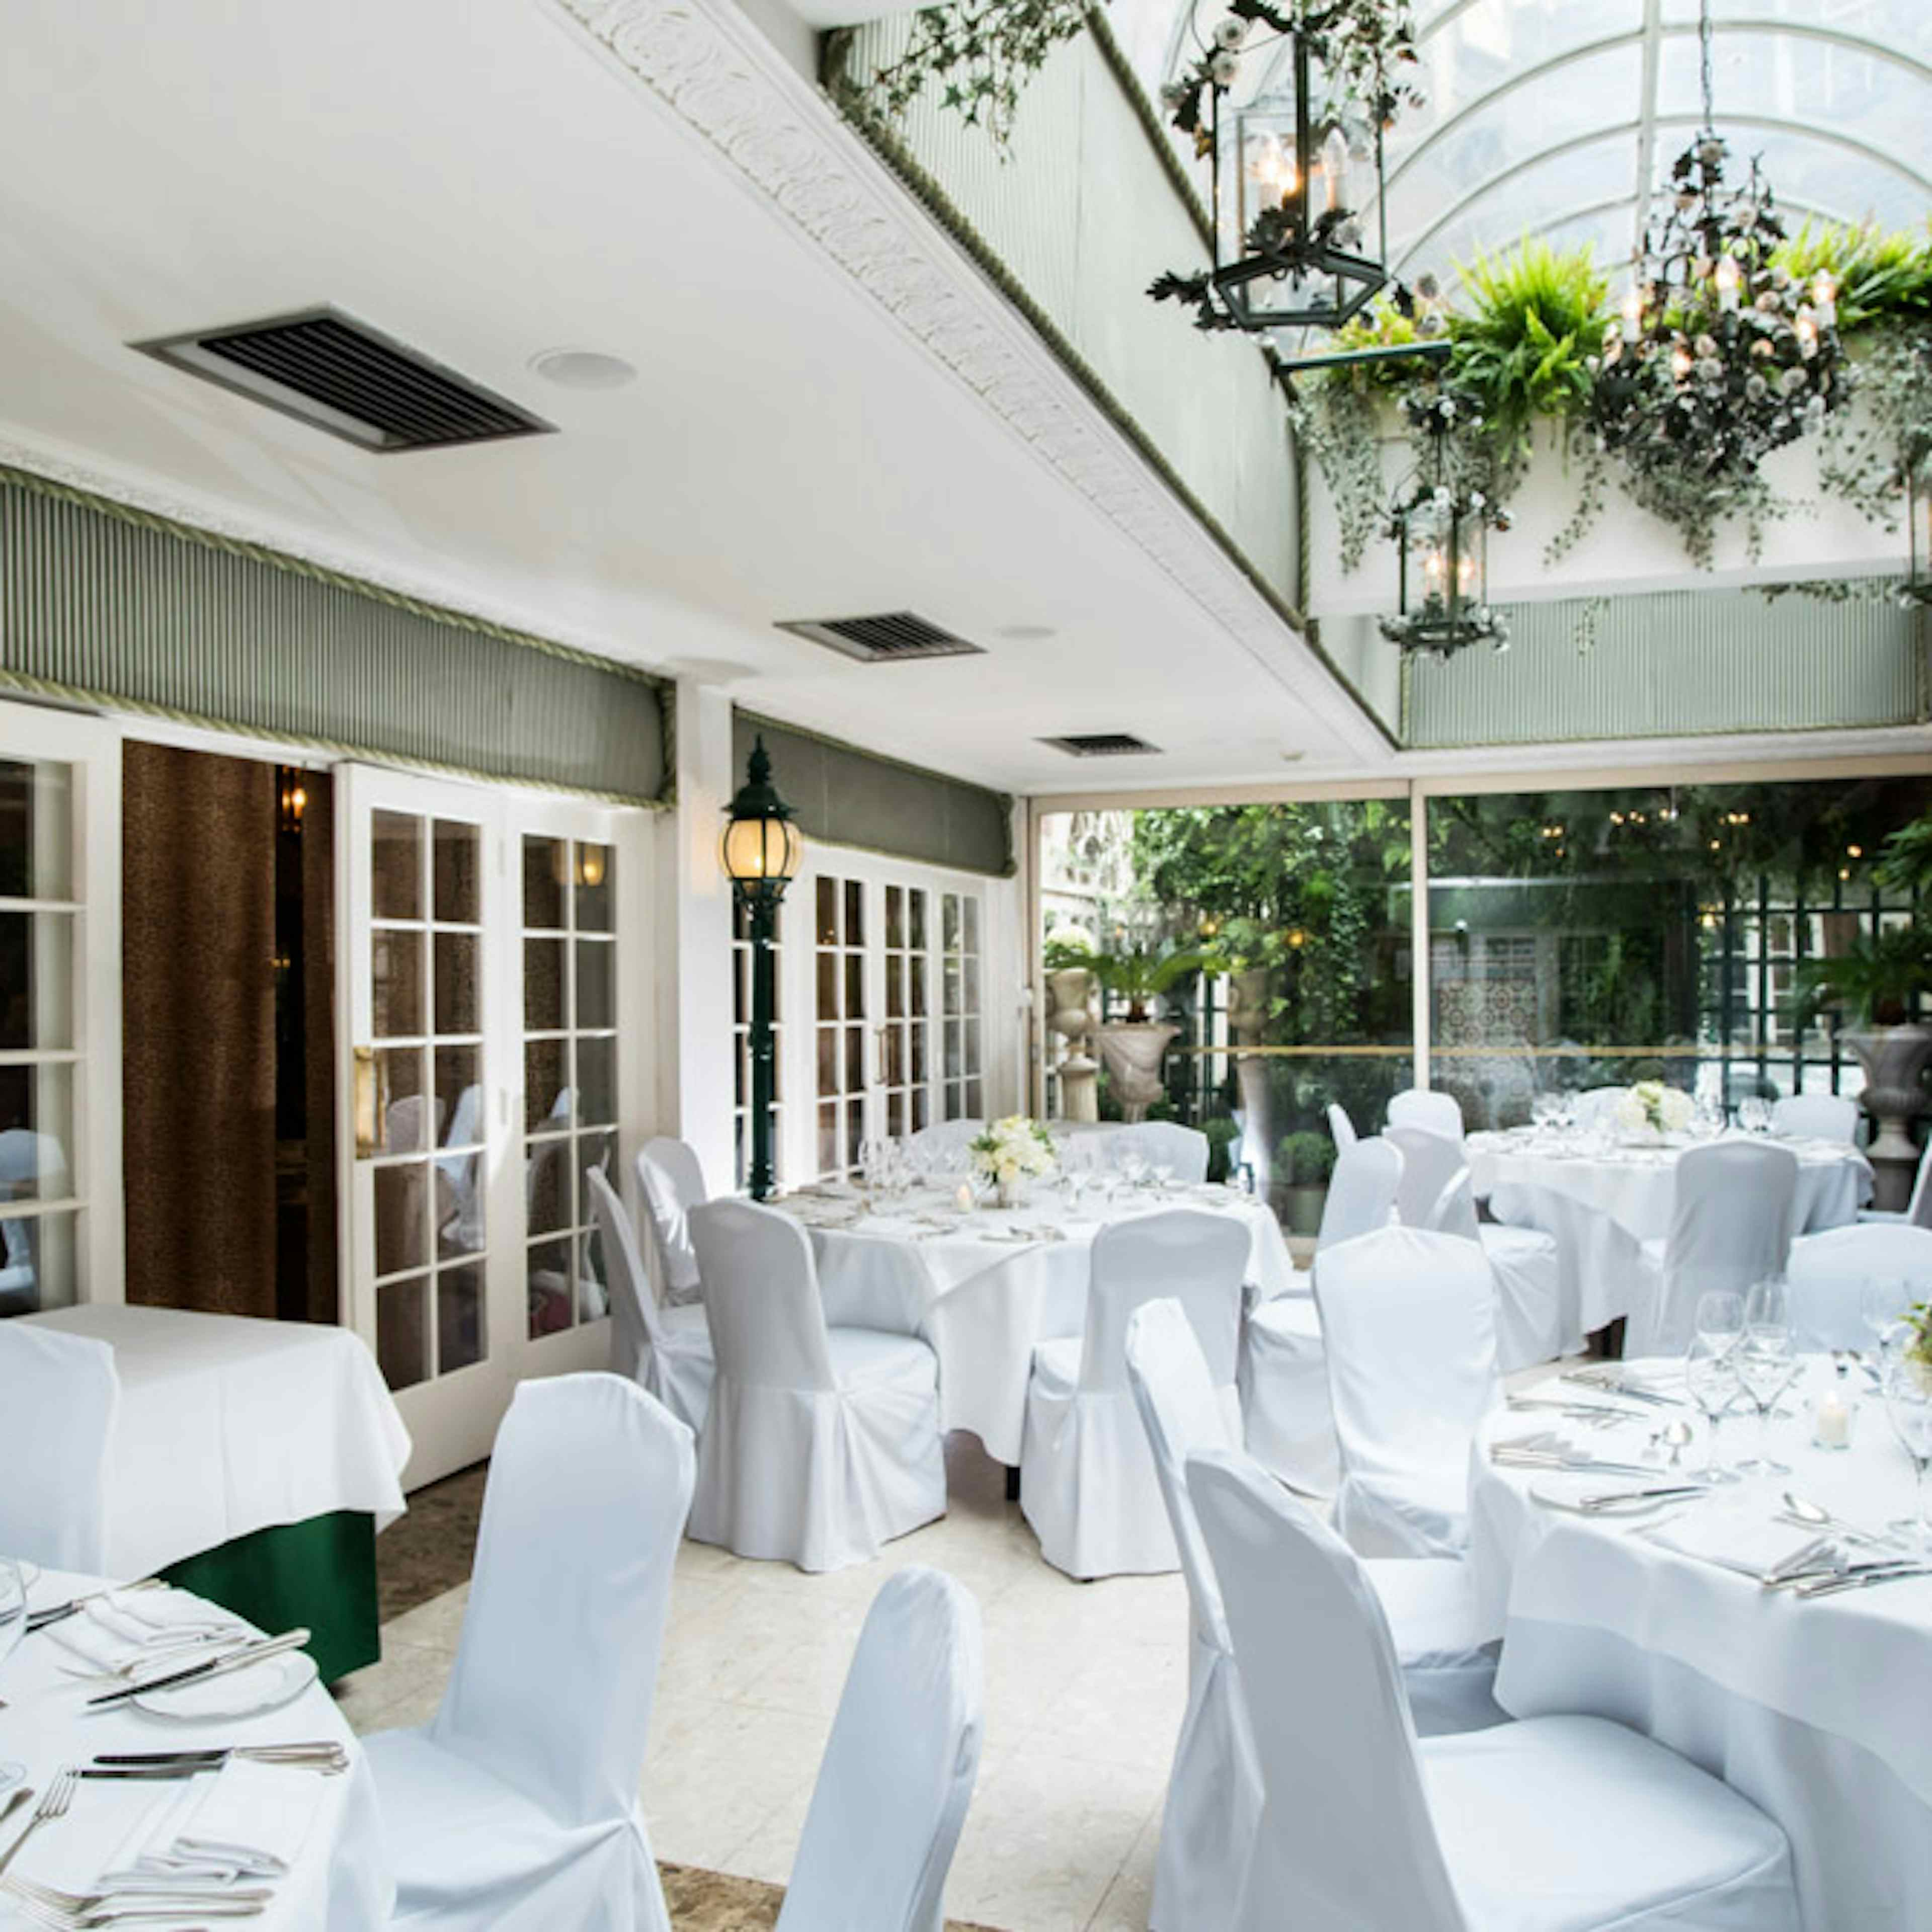 The Chesterfield Mayfair Hotel - The Conservatory image 2